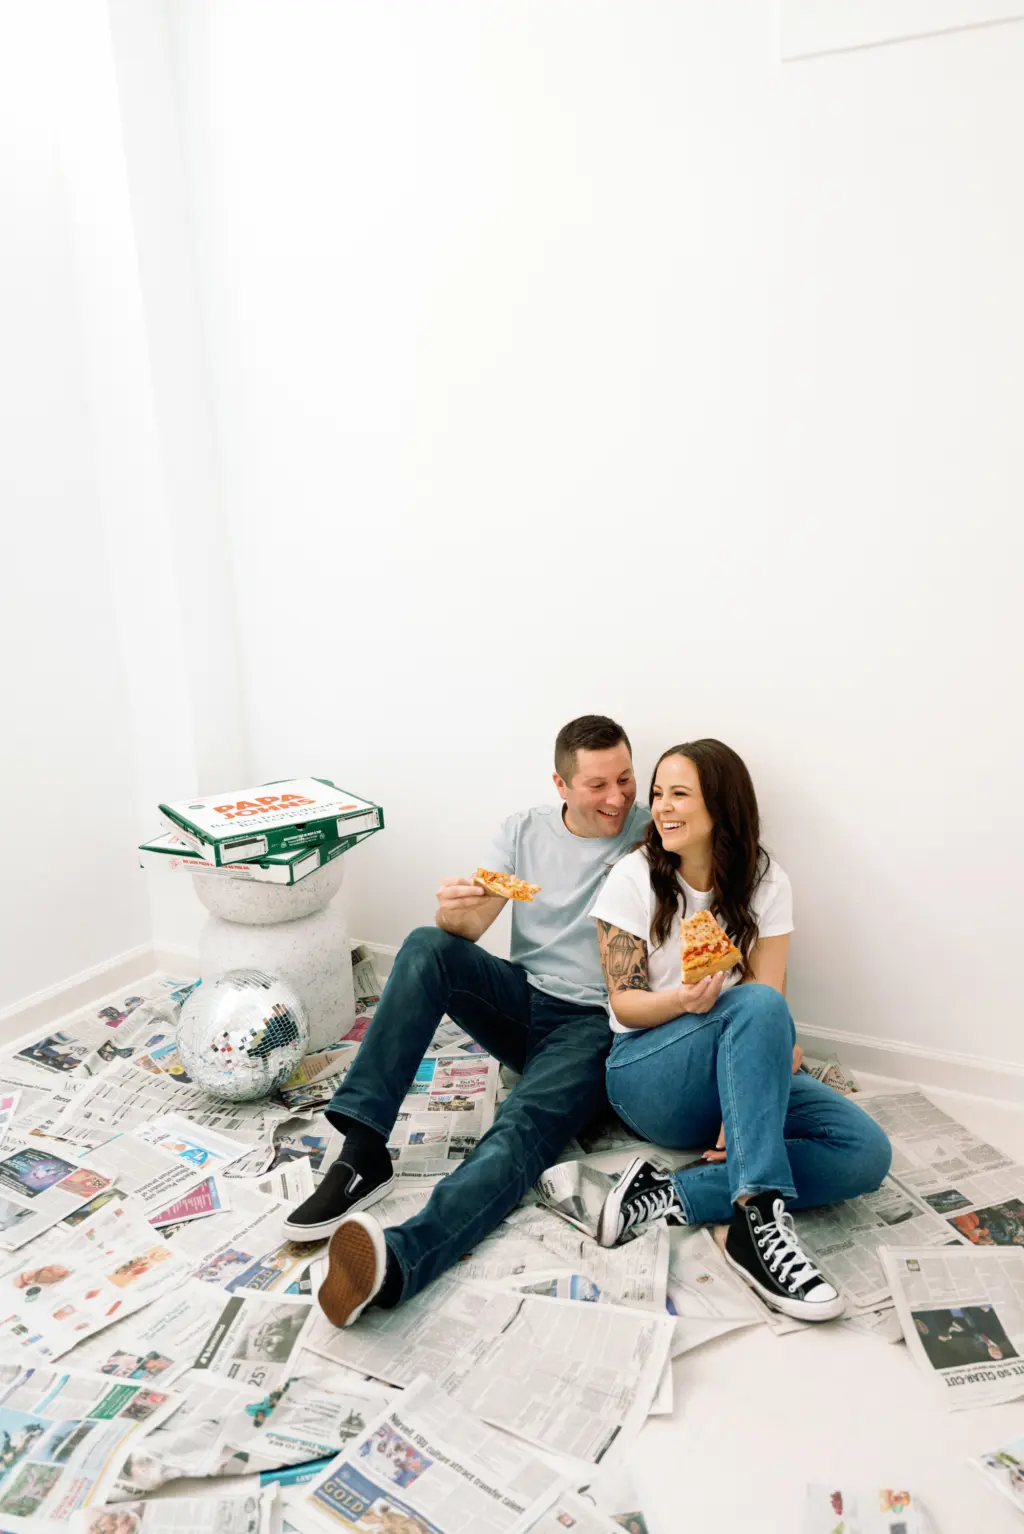 Casual Pizza Engagement Shoot | Tampa Bay Wedding Photographer Dewitt for Love Photography